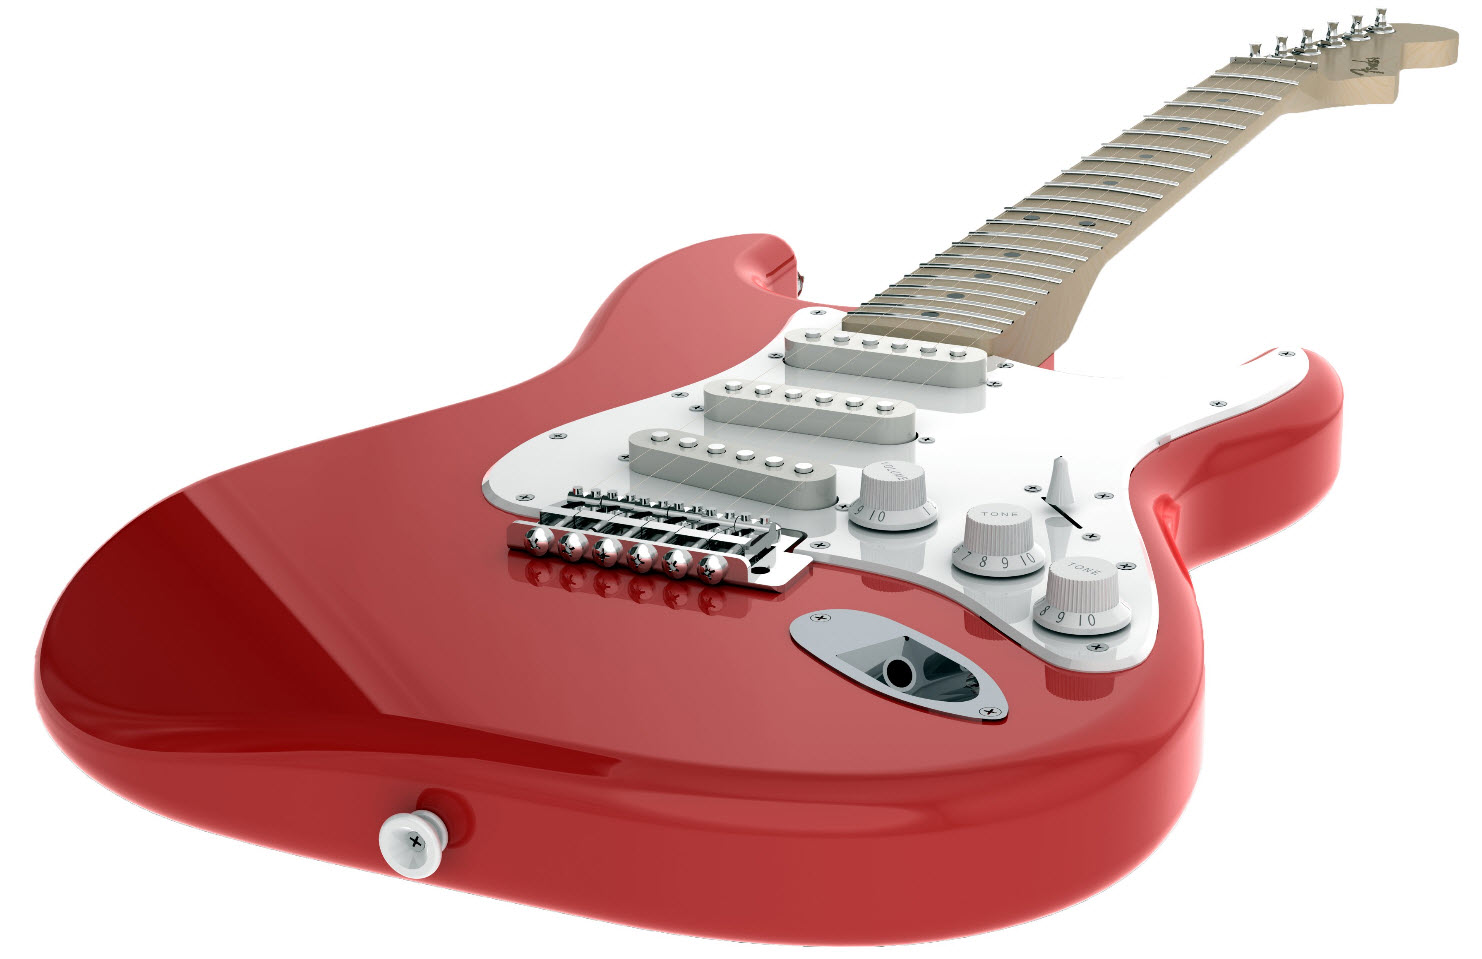 Fender Musical Instruments Corporation Rocks at Guitar Production